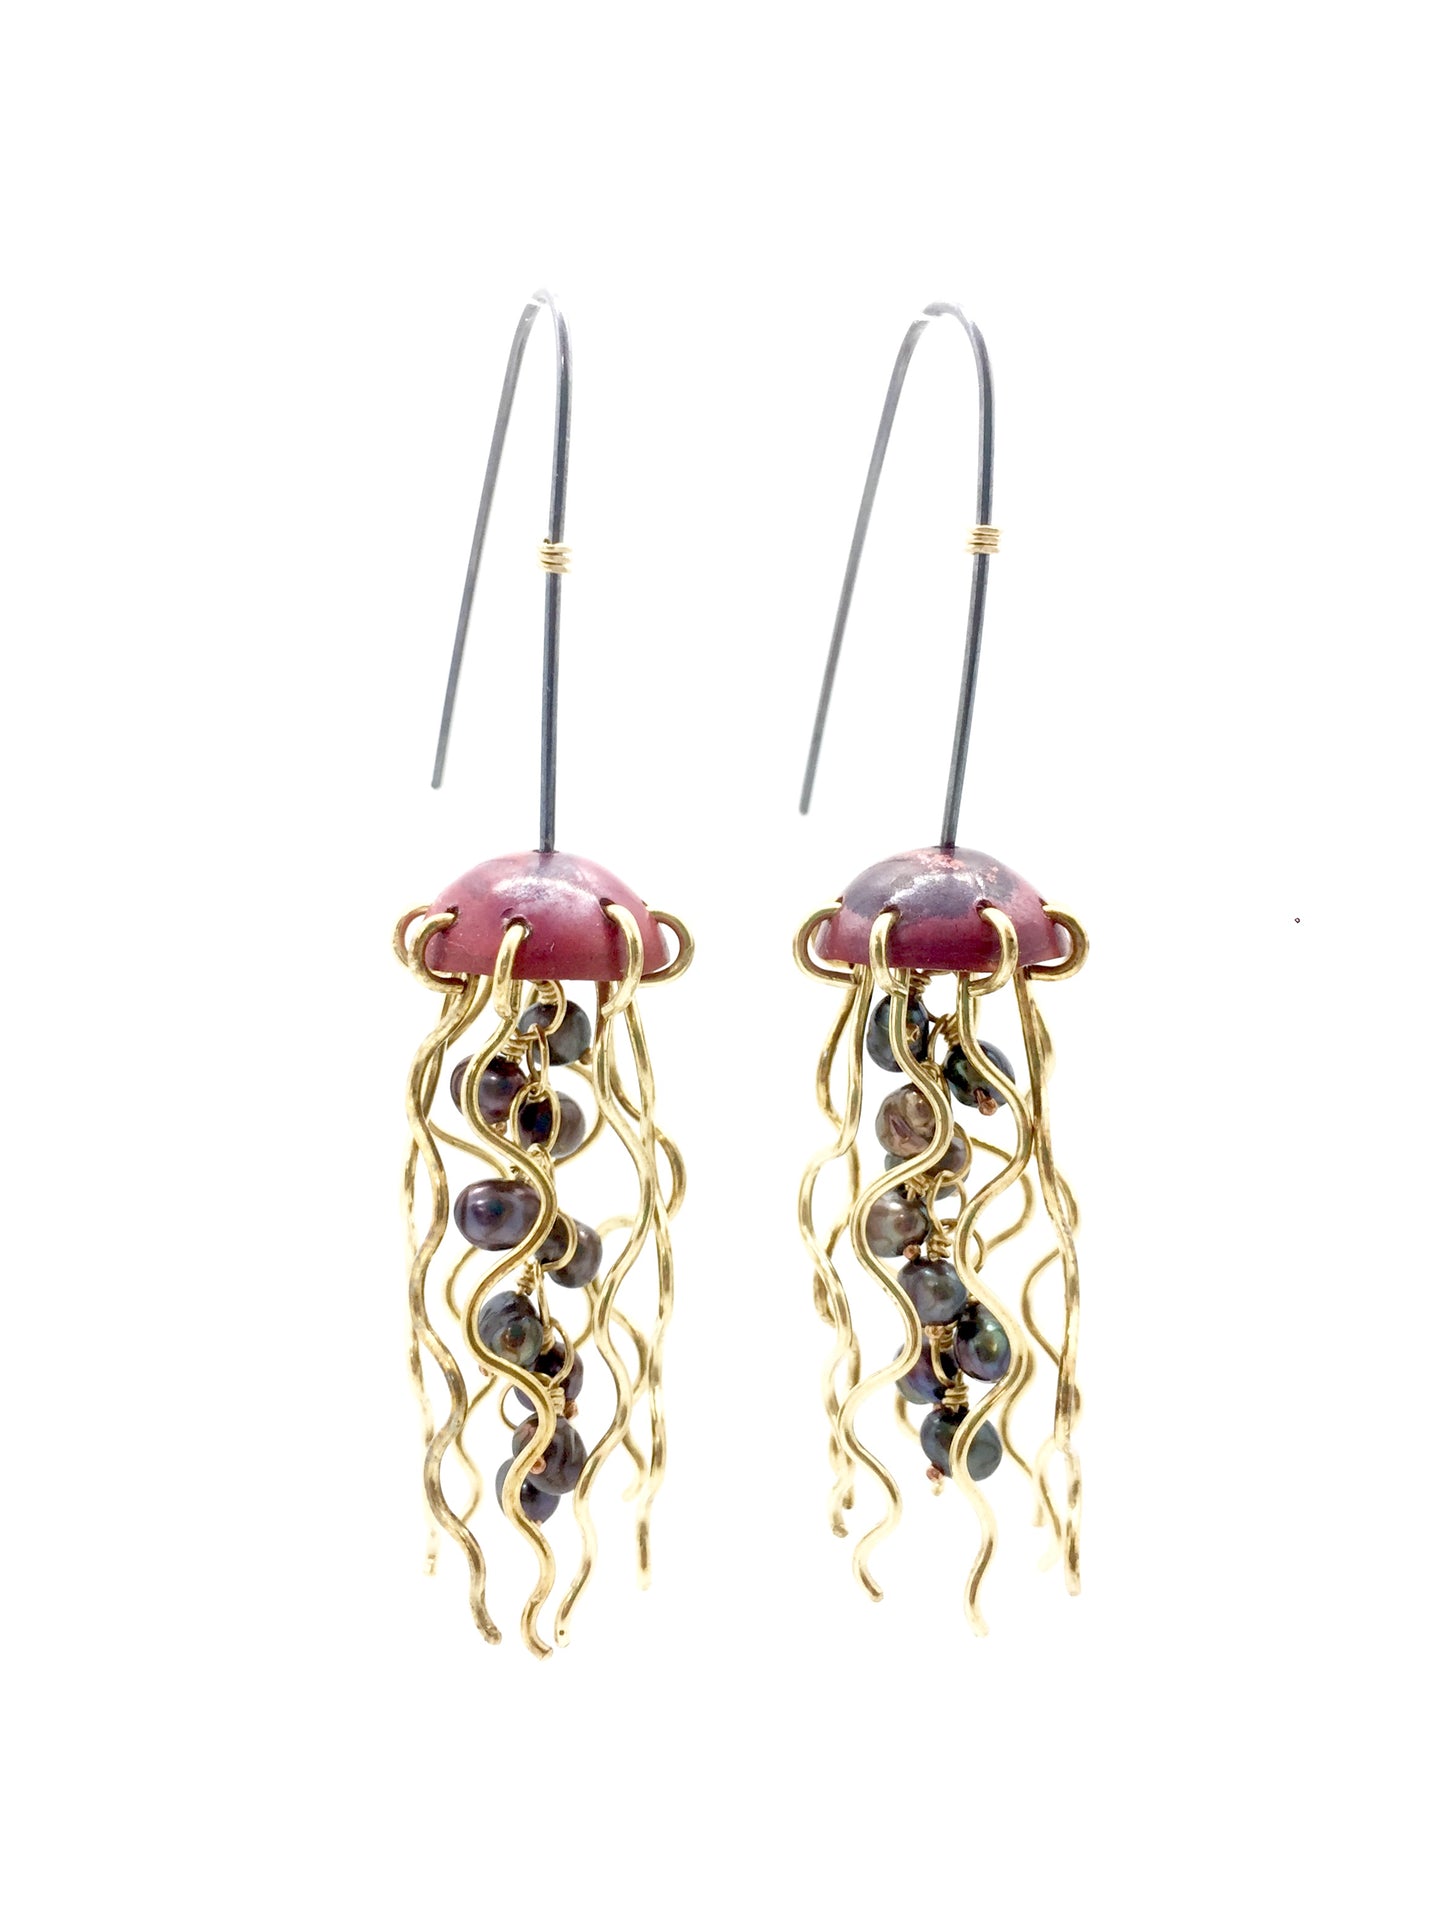 Red Copper Jellyfish Earrings with Pearls and Sterling Silver Earwires